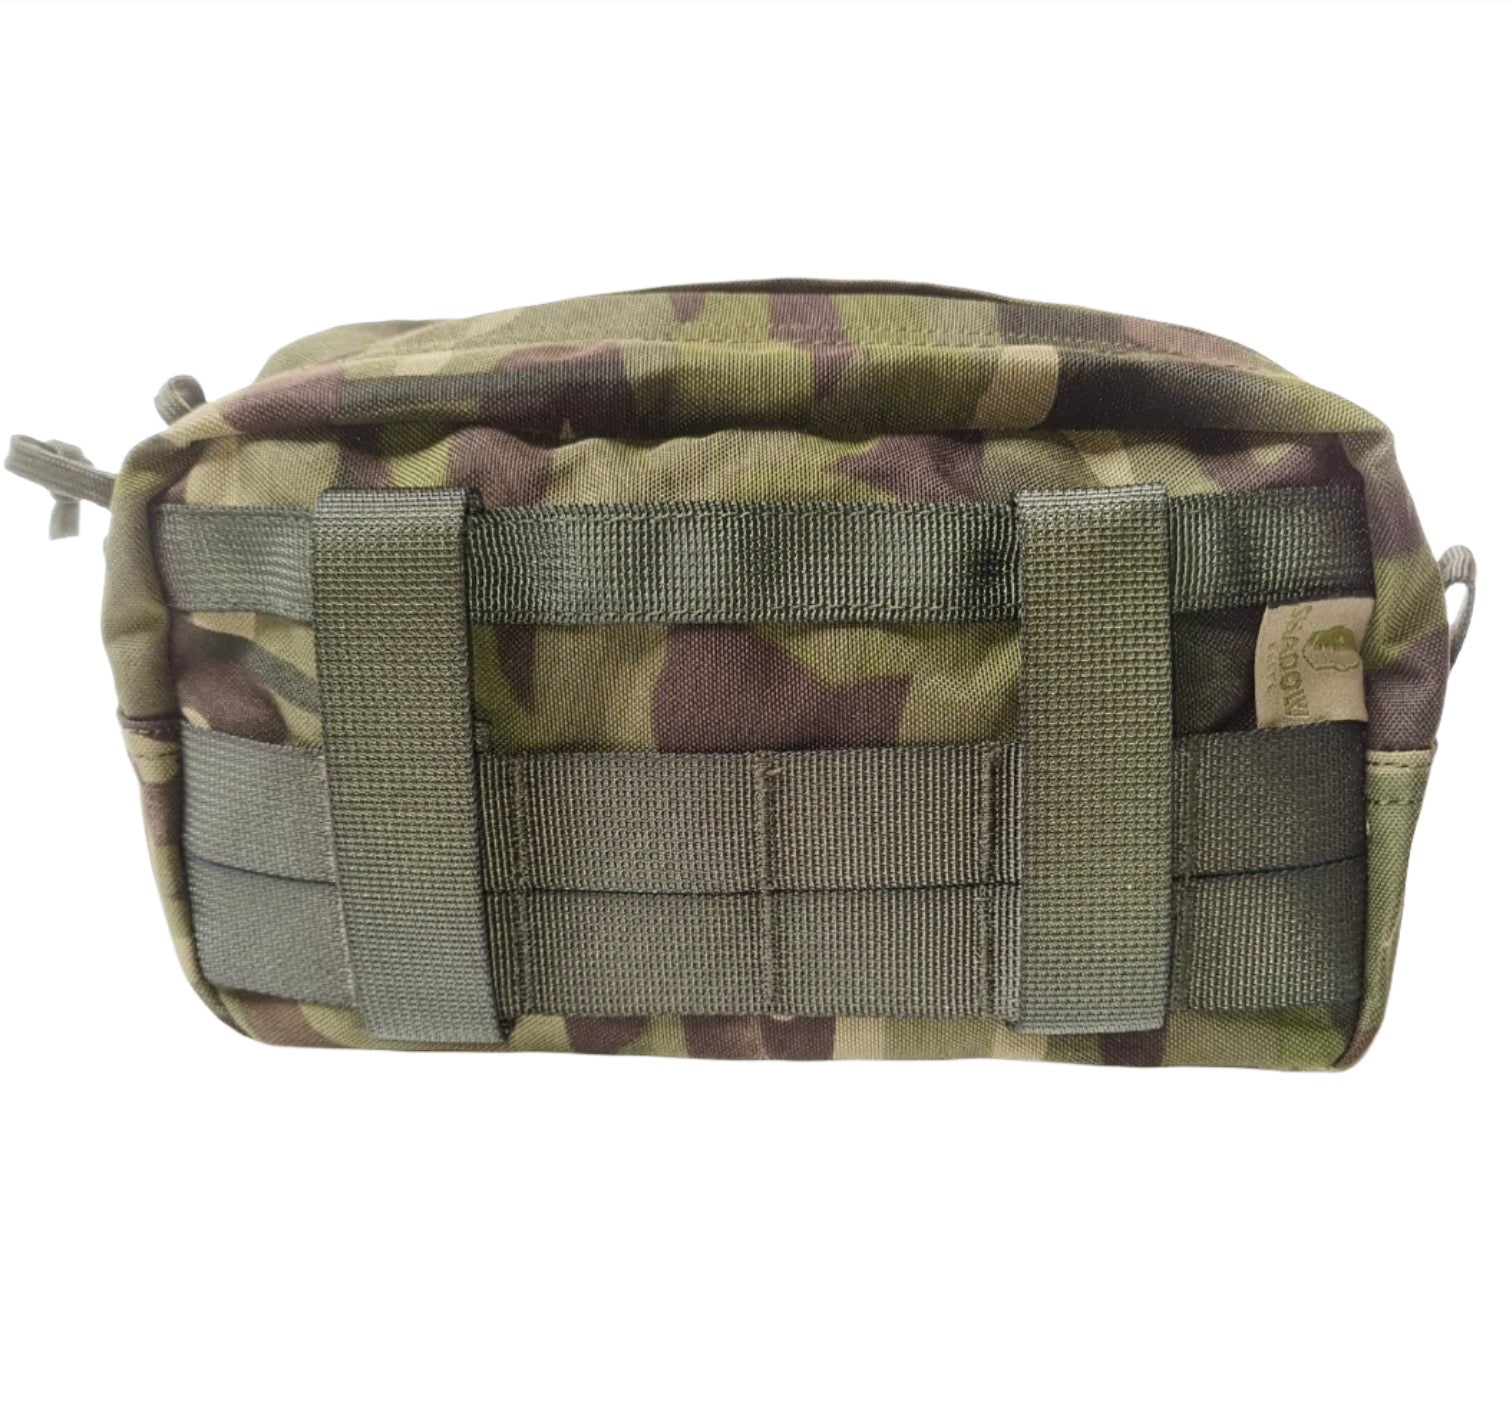 SHE-1421 HORIZONTAL UTILITY POUCH MULTICAM GREEN